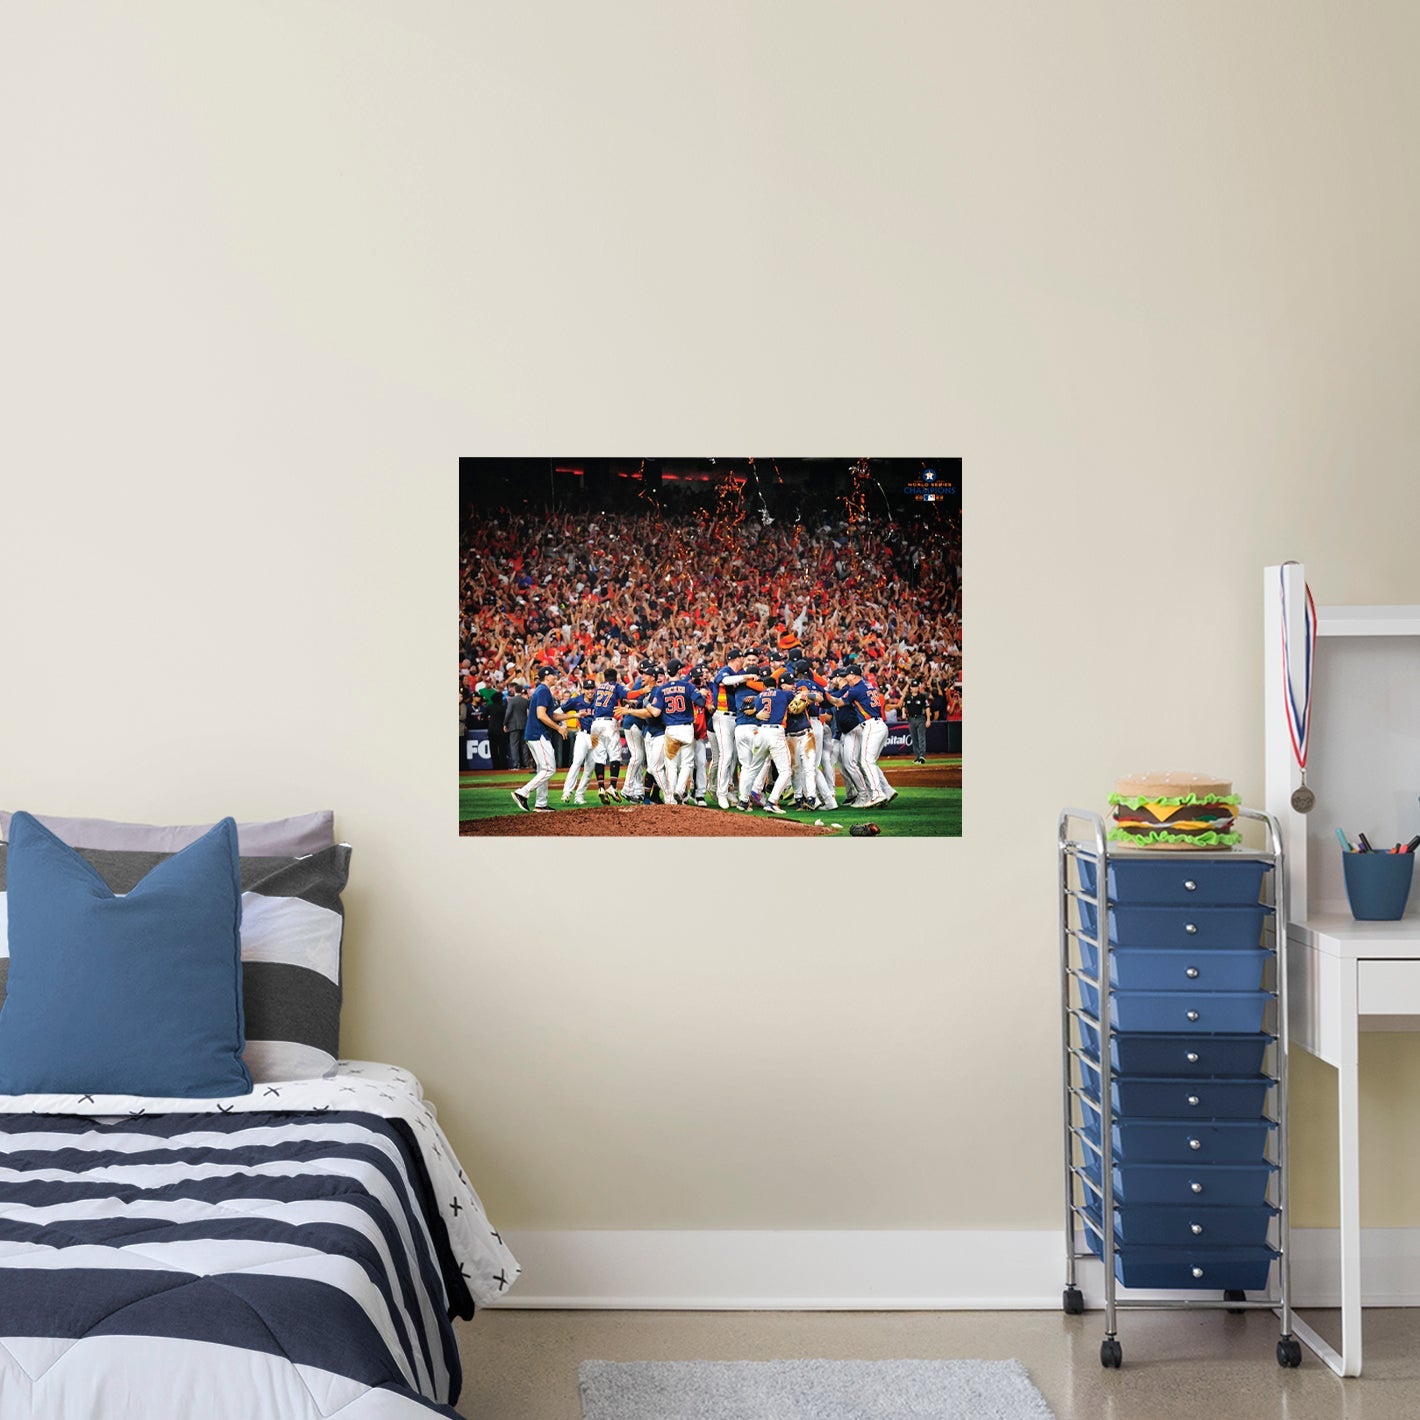 Houston Astros: 2022 World Series Champions Team Celebration Poster - Officially Licensed MLB Removable Adhesive Decal